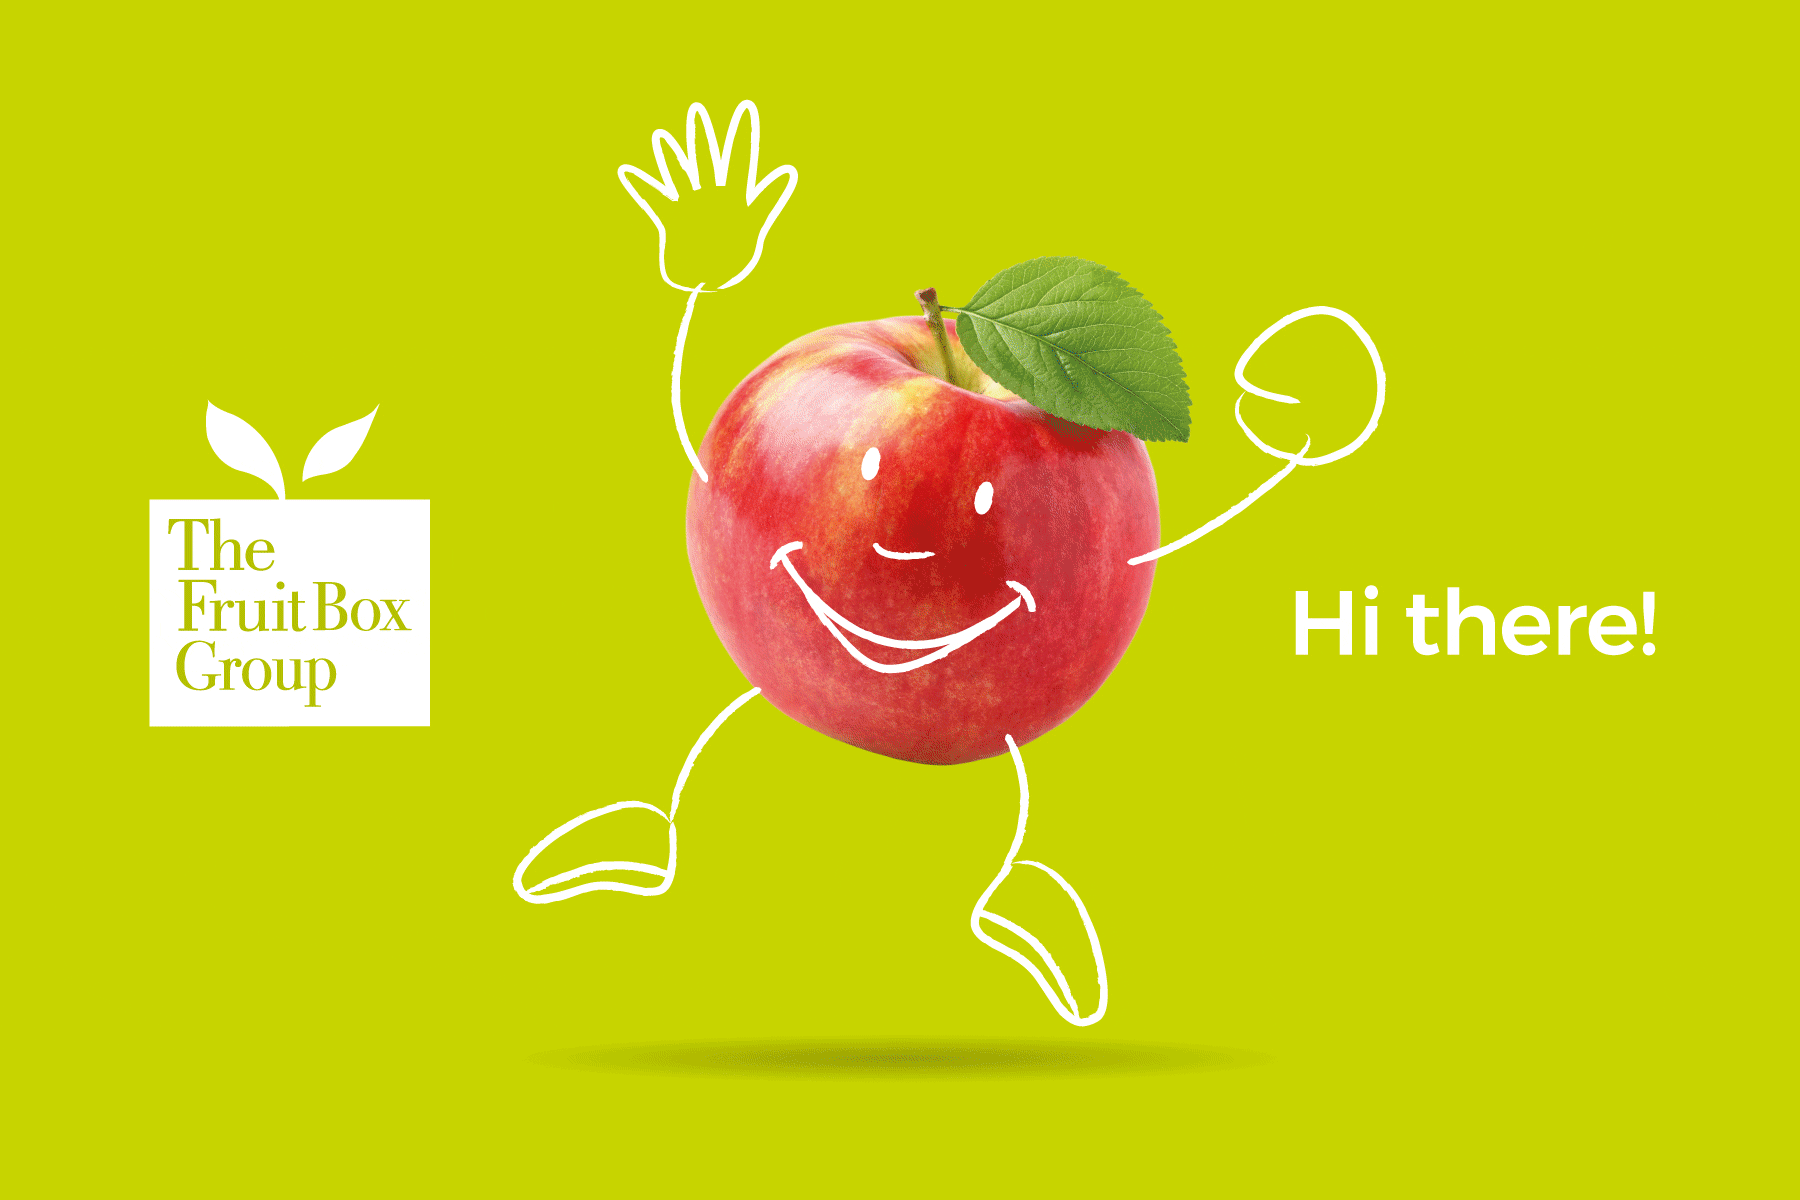 Davidson Branding Business Strategy The Fruit Box Character Illustrations and Quirky Messaging Design Studio Melbourne Brand Identity